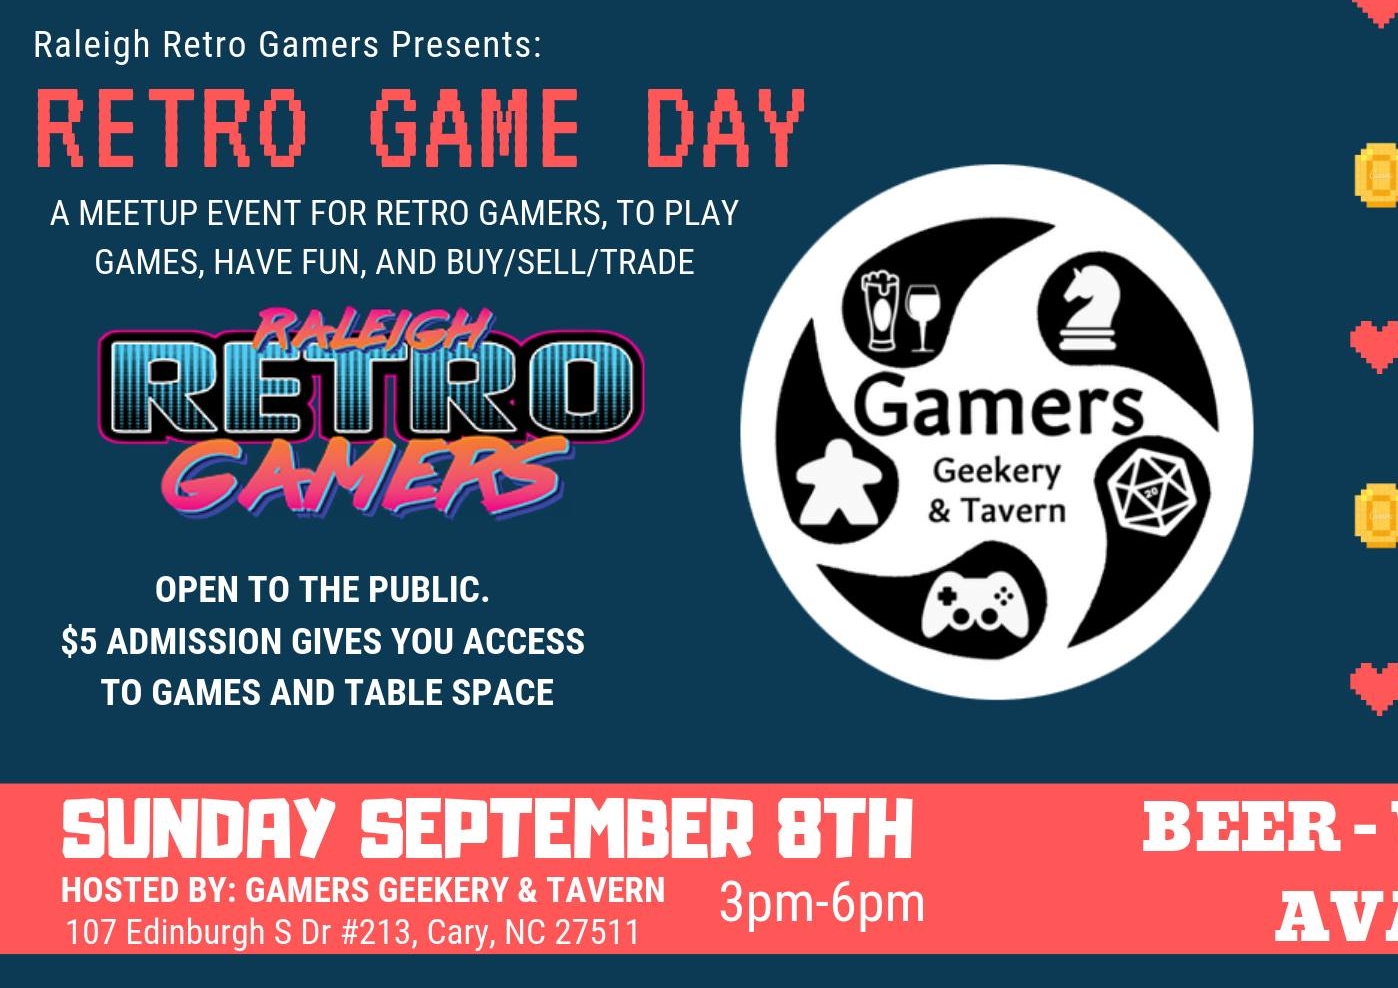 raleigh retro gamers, trade event, games and geekery tavern, retro games